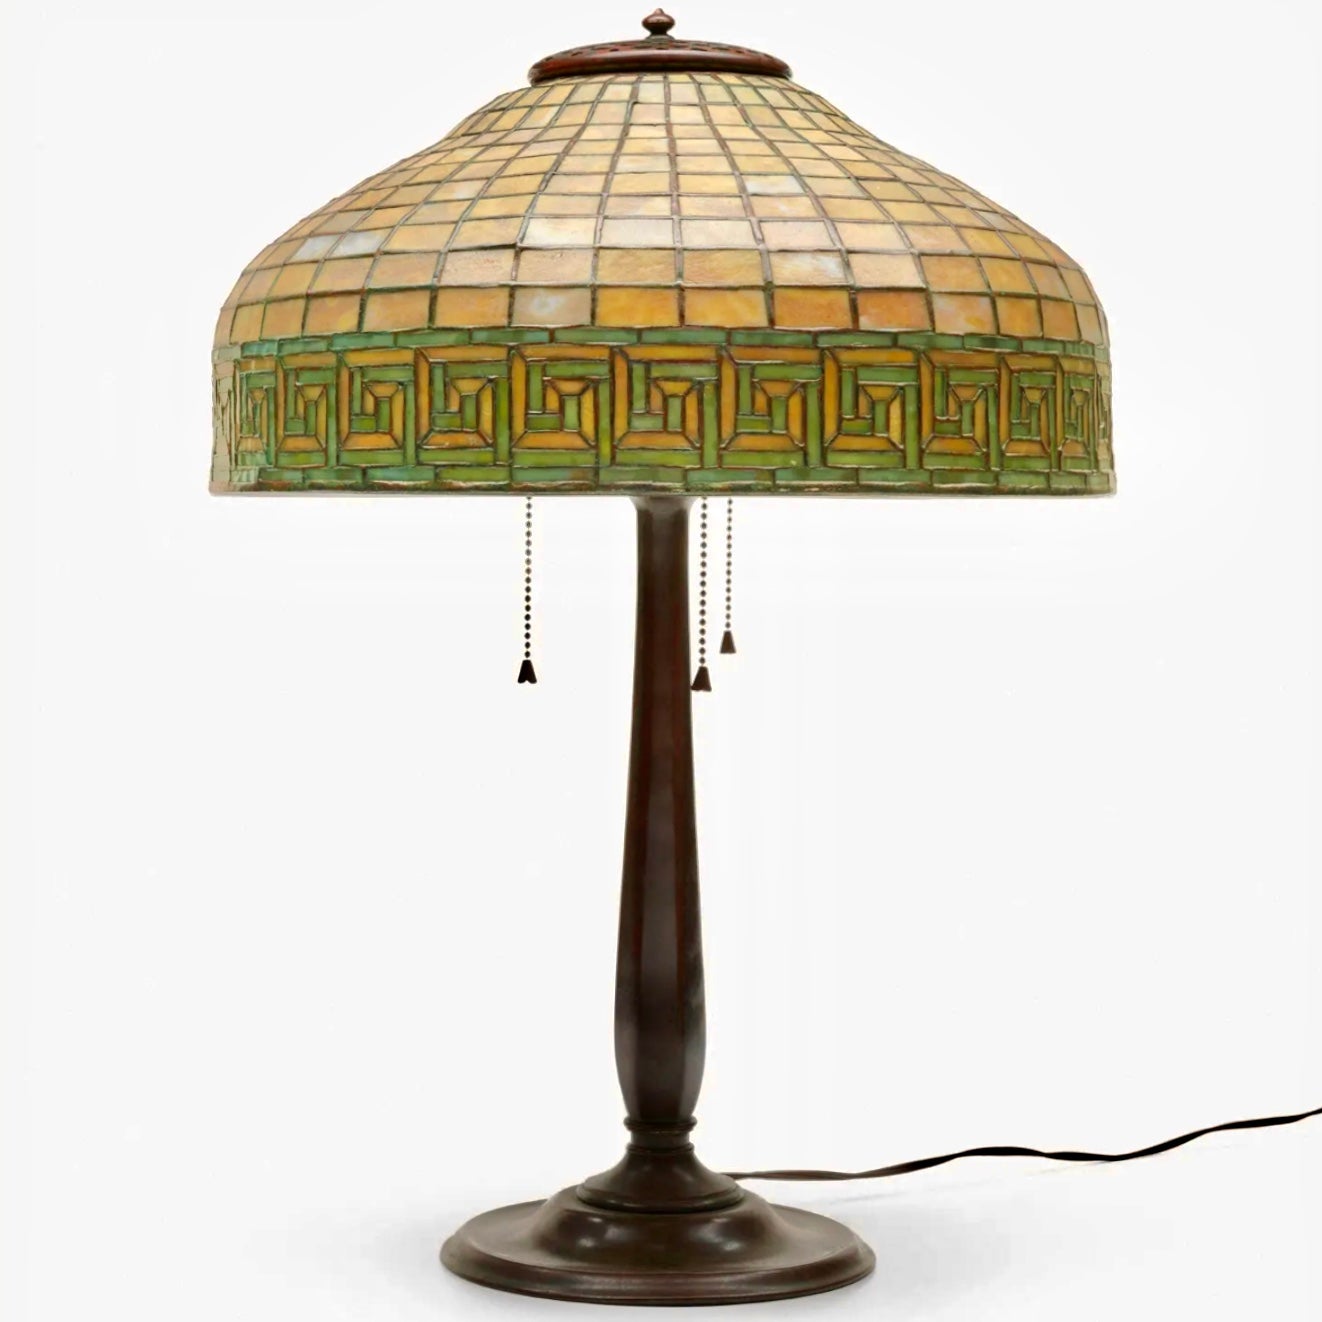 Tiffany Studios New York Geometric Greek Key Table Lamp
New York circa. 1910
Leaded glass, Patinated bronze
Dimensions: 22.25 Inches High
Diameter: 16 Inches
(57 x 41 cm)

Condition: Excellent with no damage or repairs. No heat cracks detected with